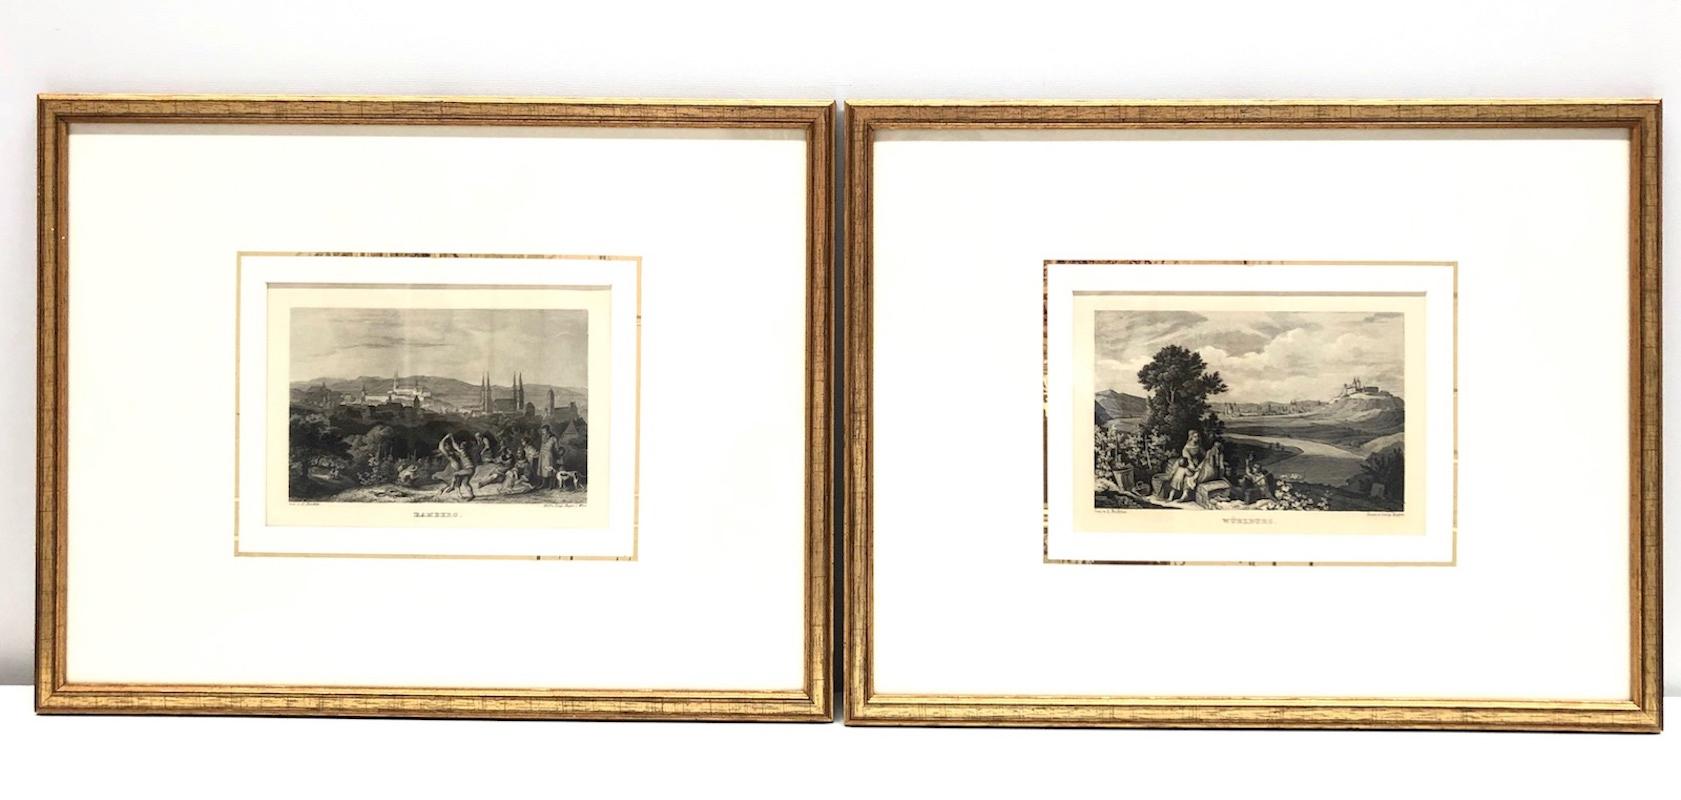 An extraordinary collection of prints, by L. Richter, engraved by Leopold Beyer, Vienna, showing views of various towns, mountainous landscapes and historic views. Showing views of Wuerzburg, Wertheim, Bamberg and Kitzingen.
Framed in handmade gilt